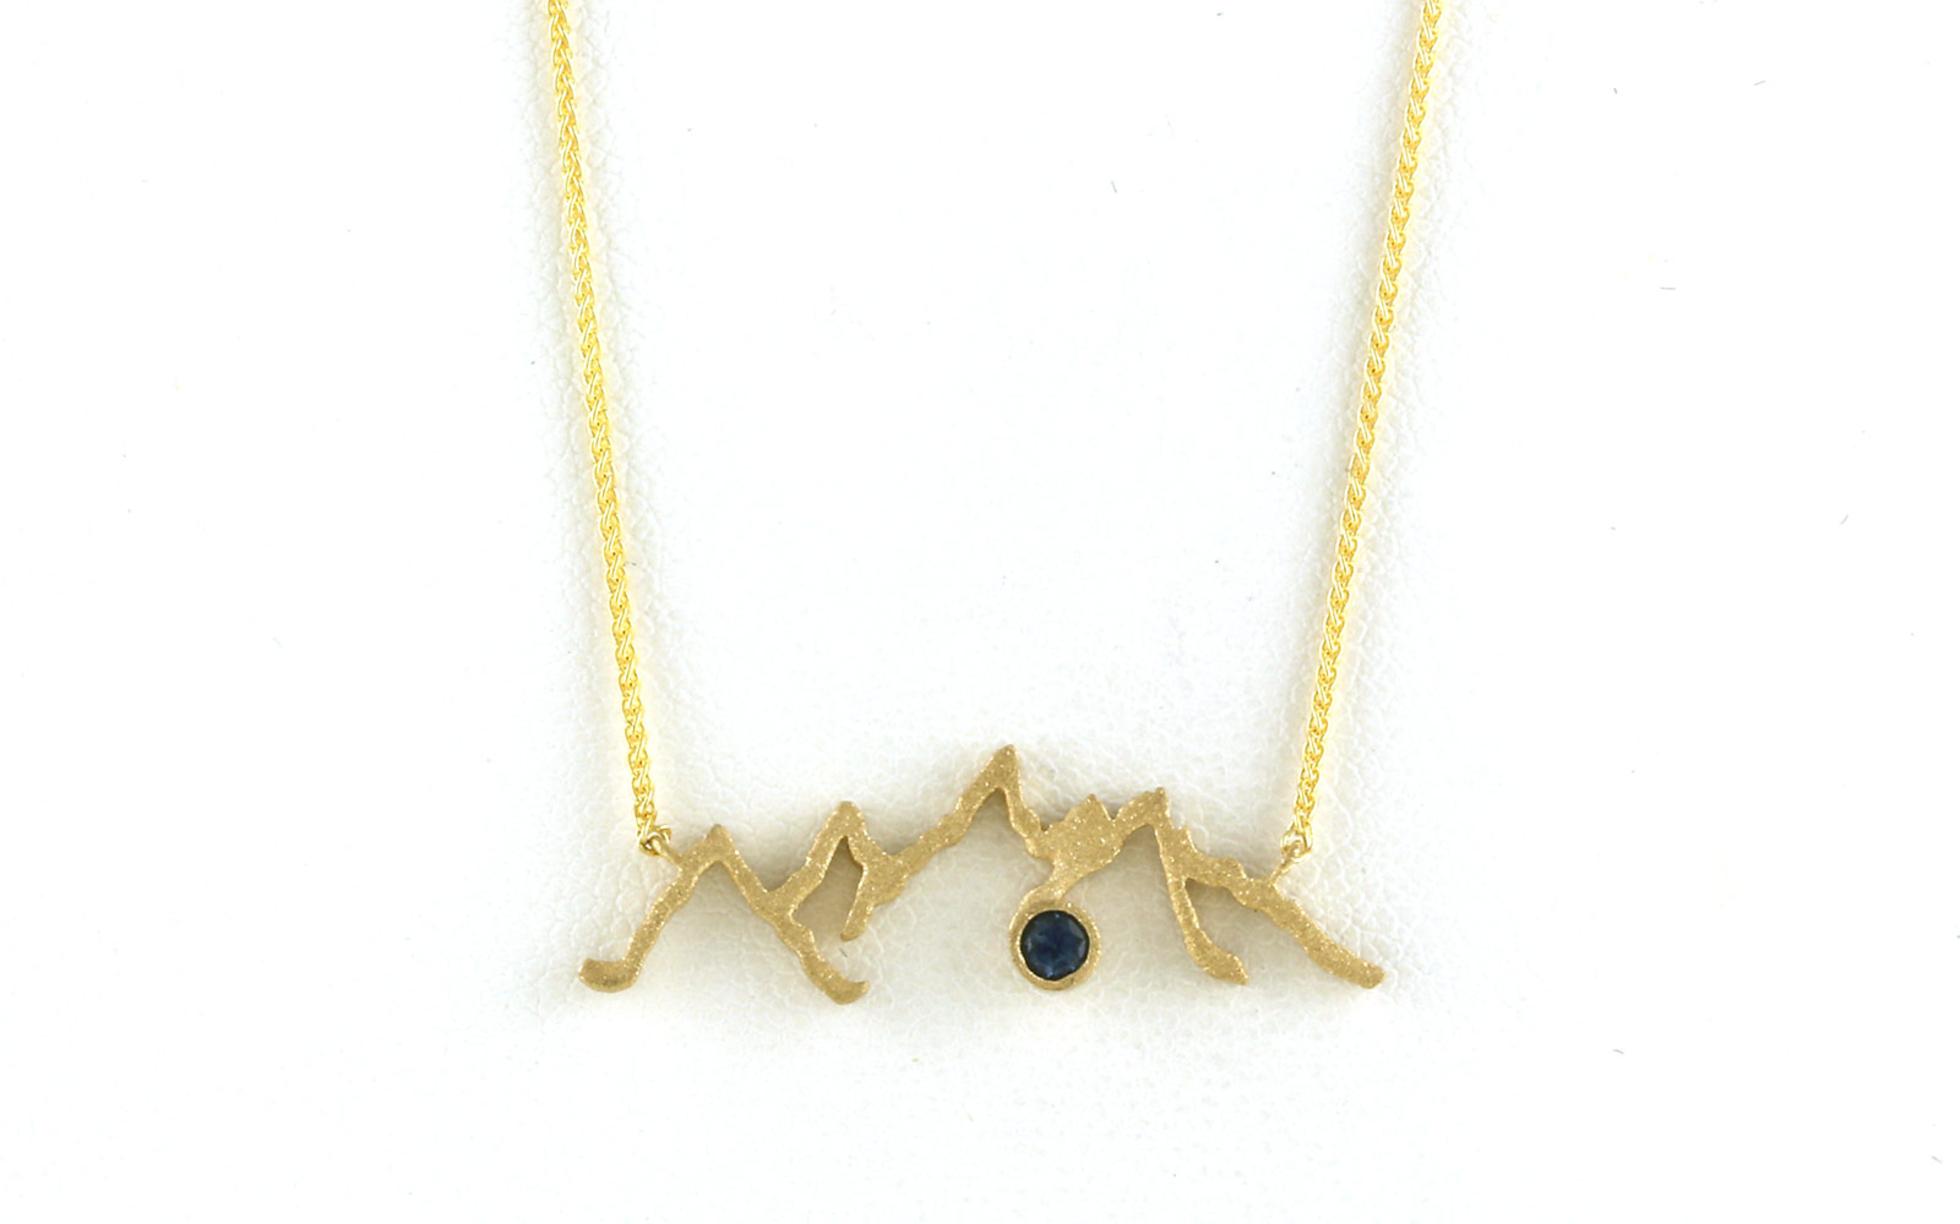 Mountain Ridgeline Bezel-set Montana Sapphire Necklace with Matte Finish in Yellow Gold (0.10cts TWT)